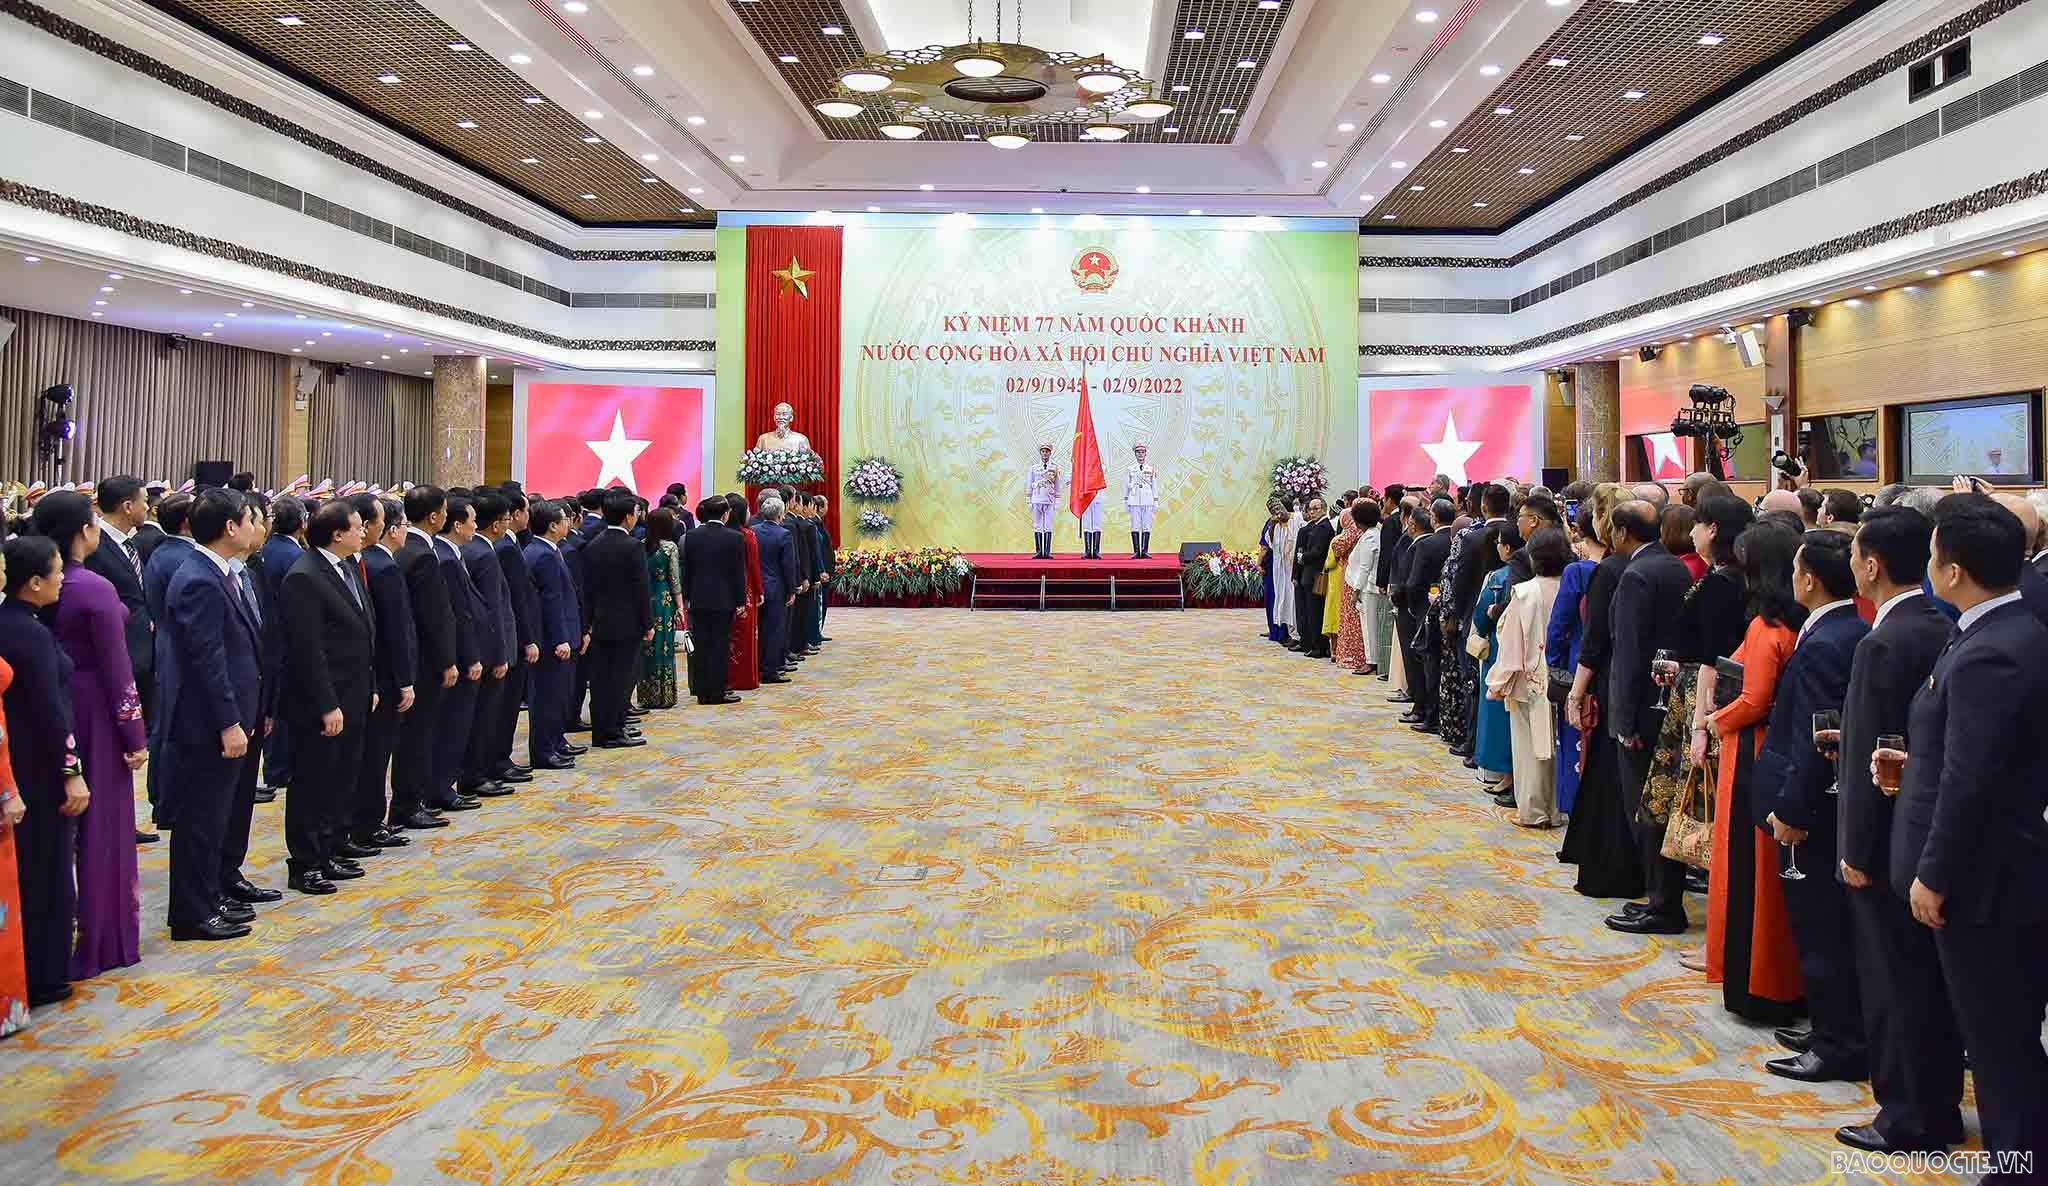 President hosts ceremony marking 77th National Day